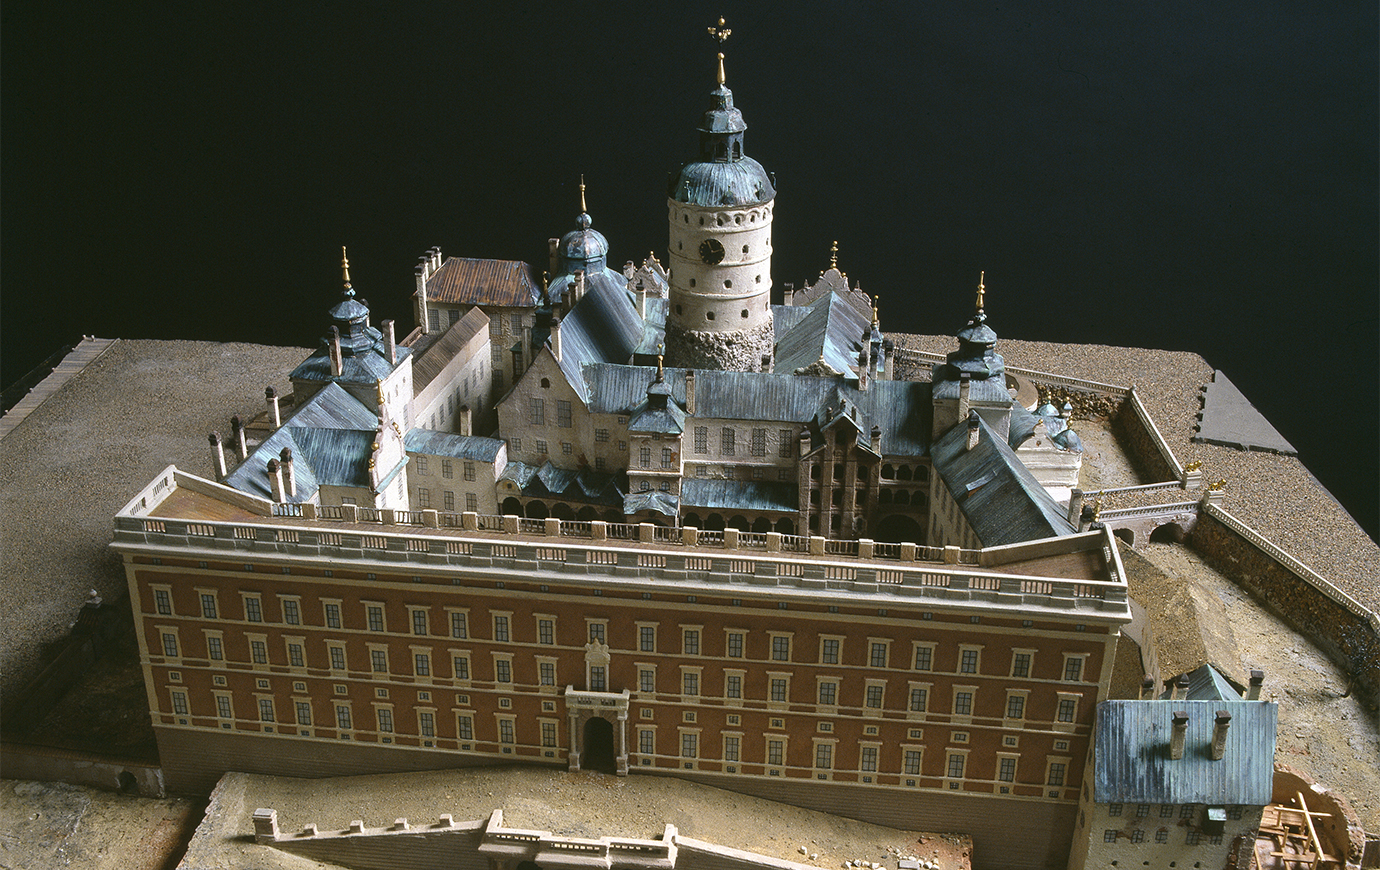 Model of the Tre Kronor (Three Crowns) Palace before the fire in 1697. 